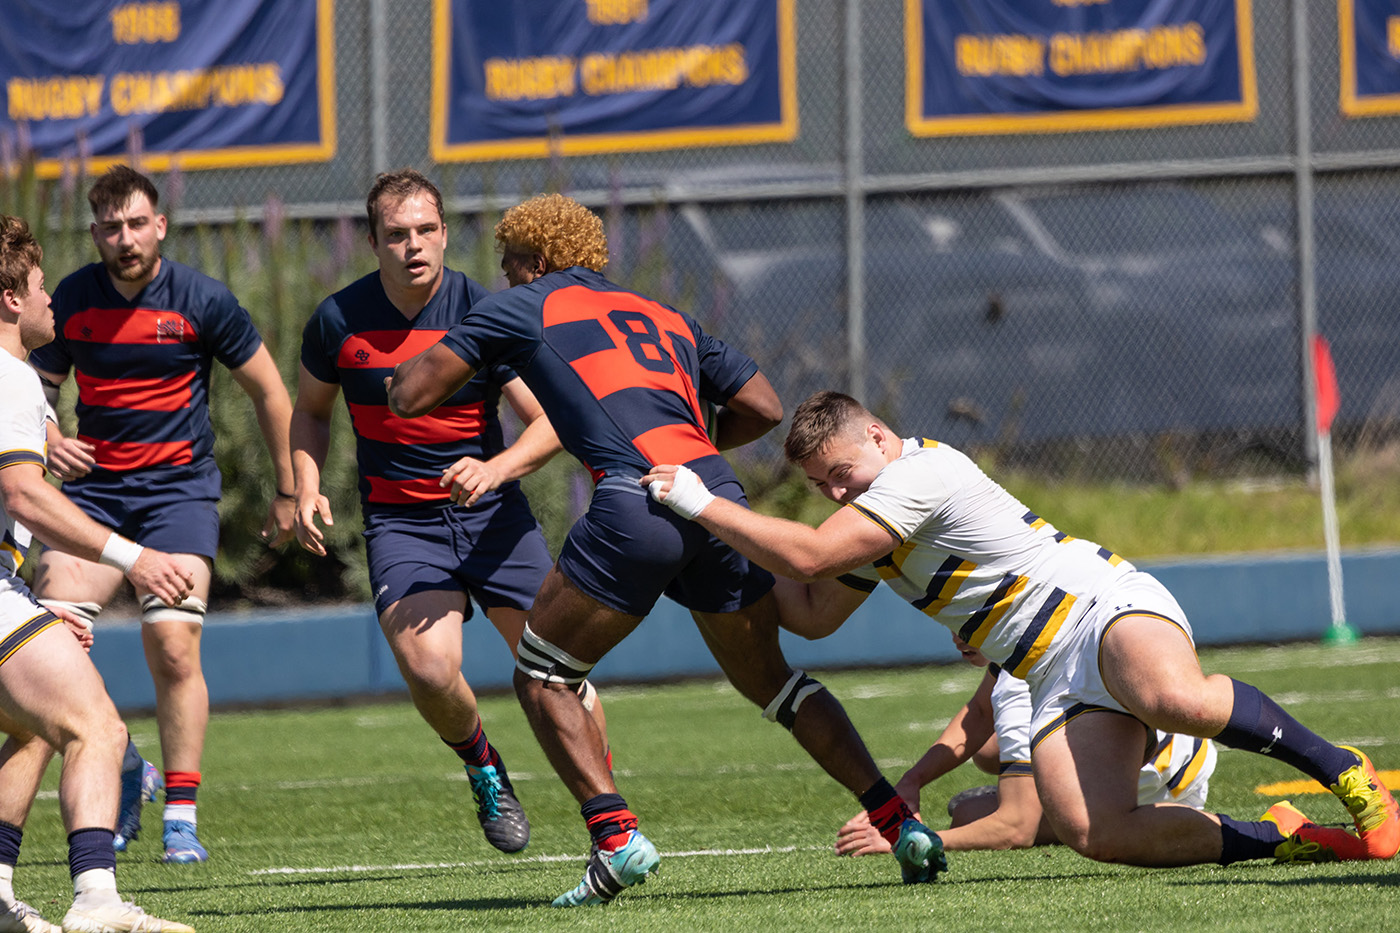 Saint Marys rugby players Kaipono Kayoshi, Josh Allan and Lleyton Delzell in the background against UC Berkeley March 25, 2023